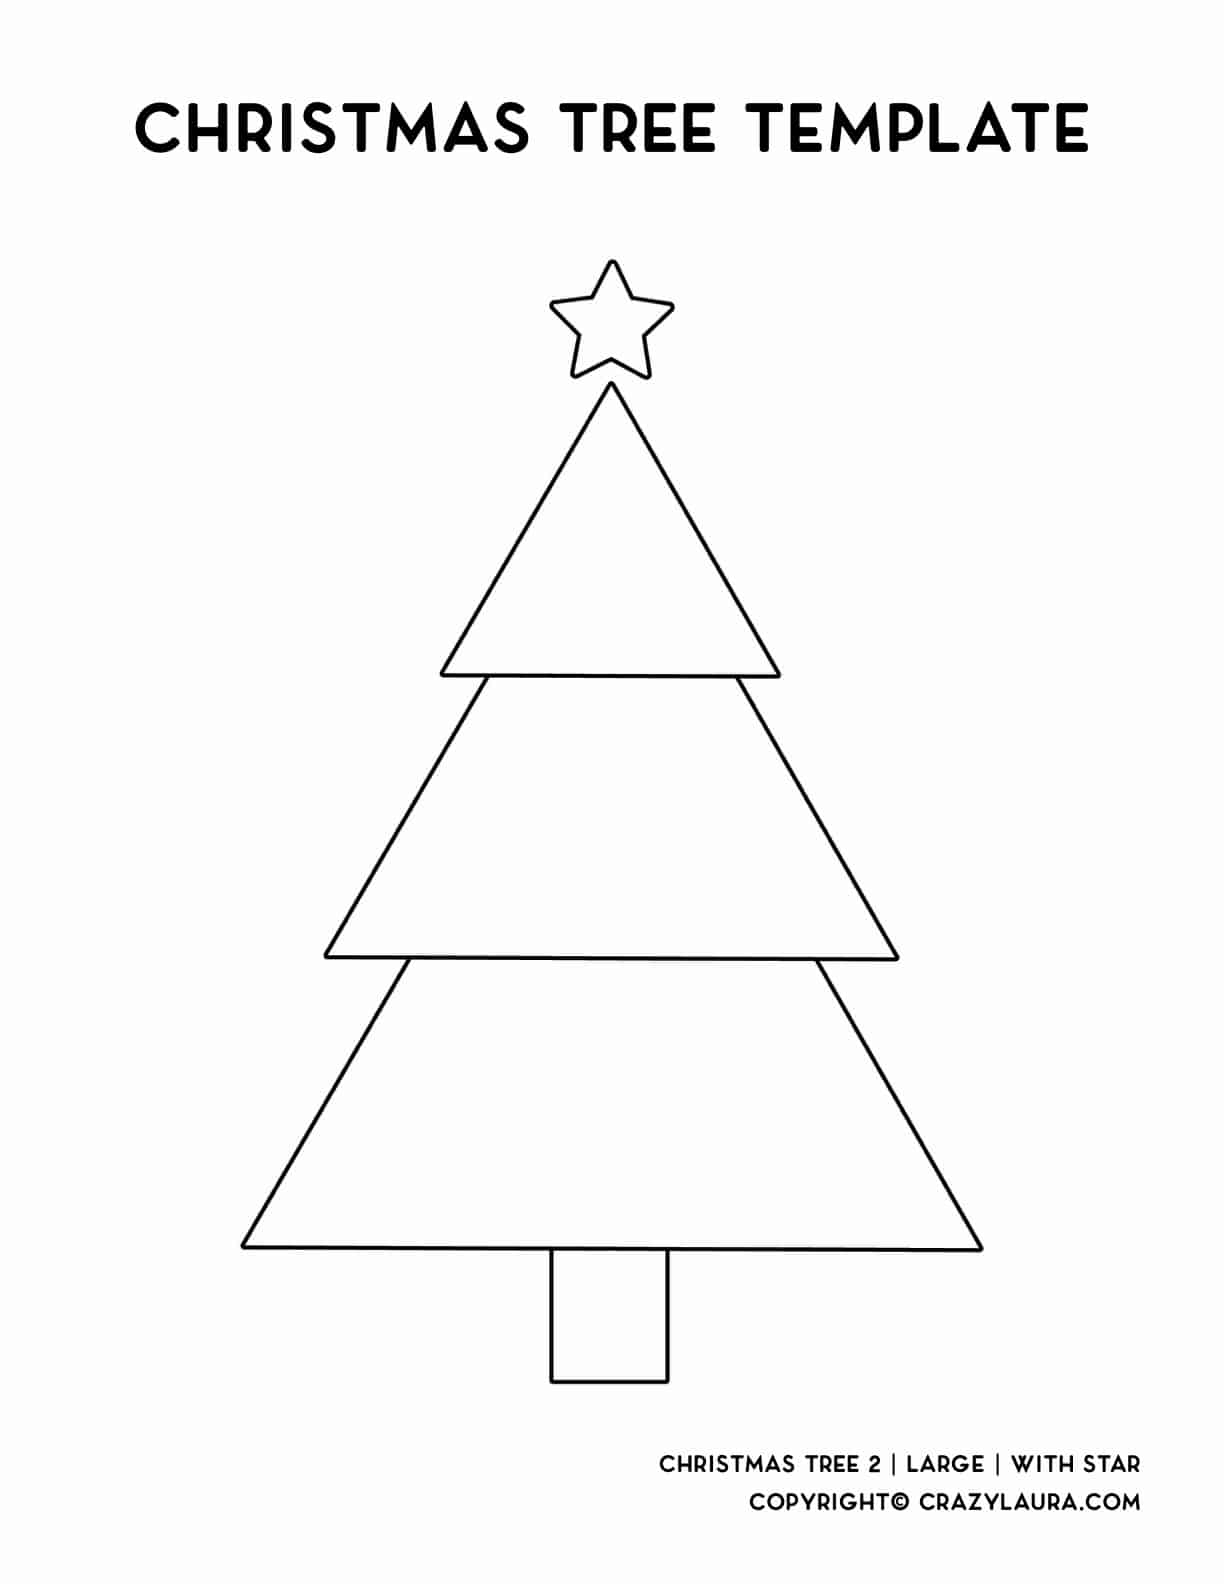 Free Christmas Tree Template Stencil Patterns For 2022 Crazy Laura